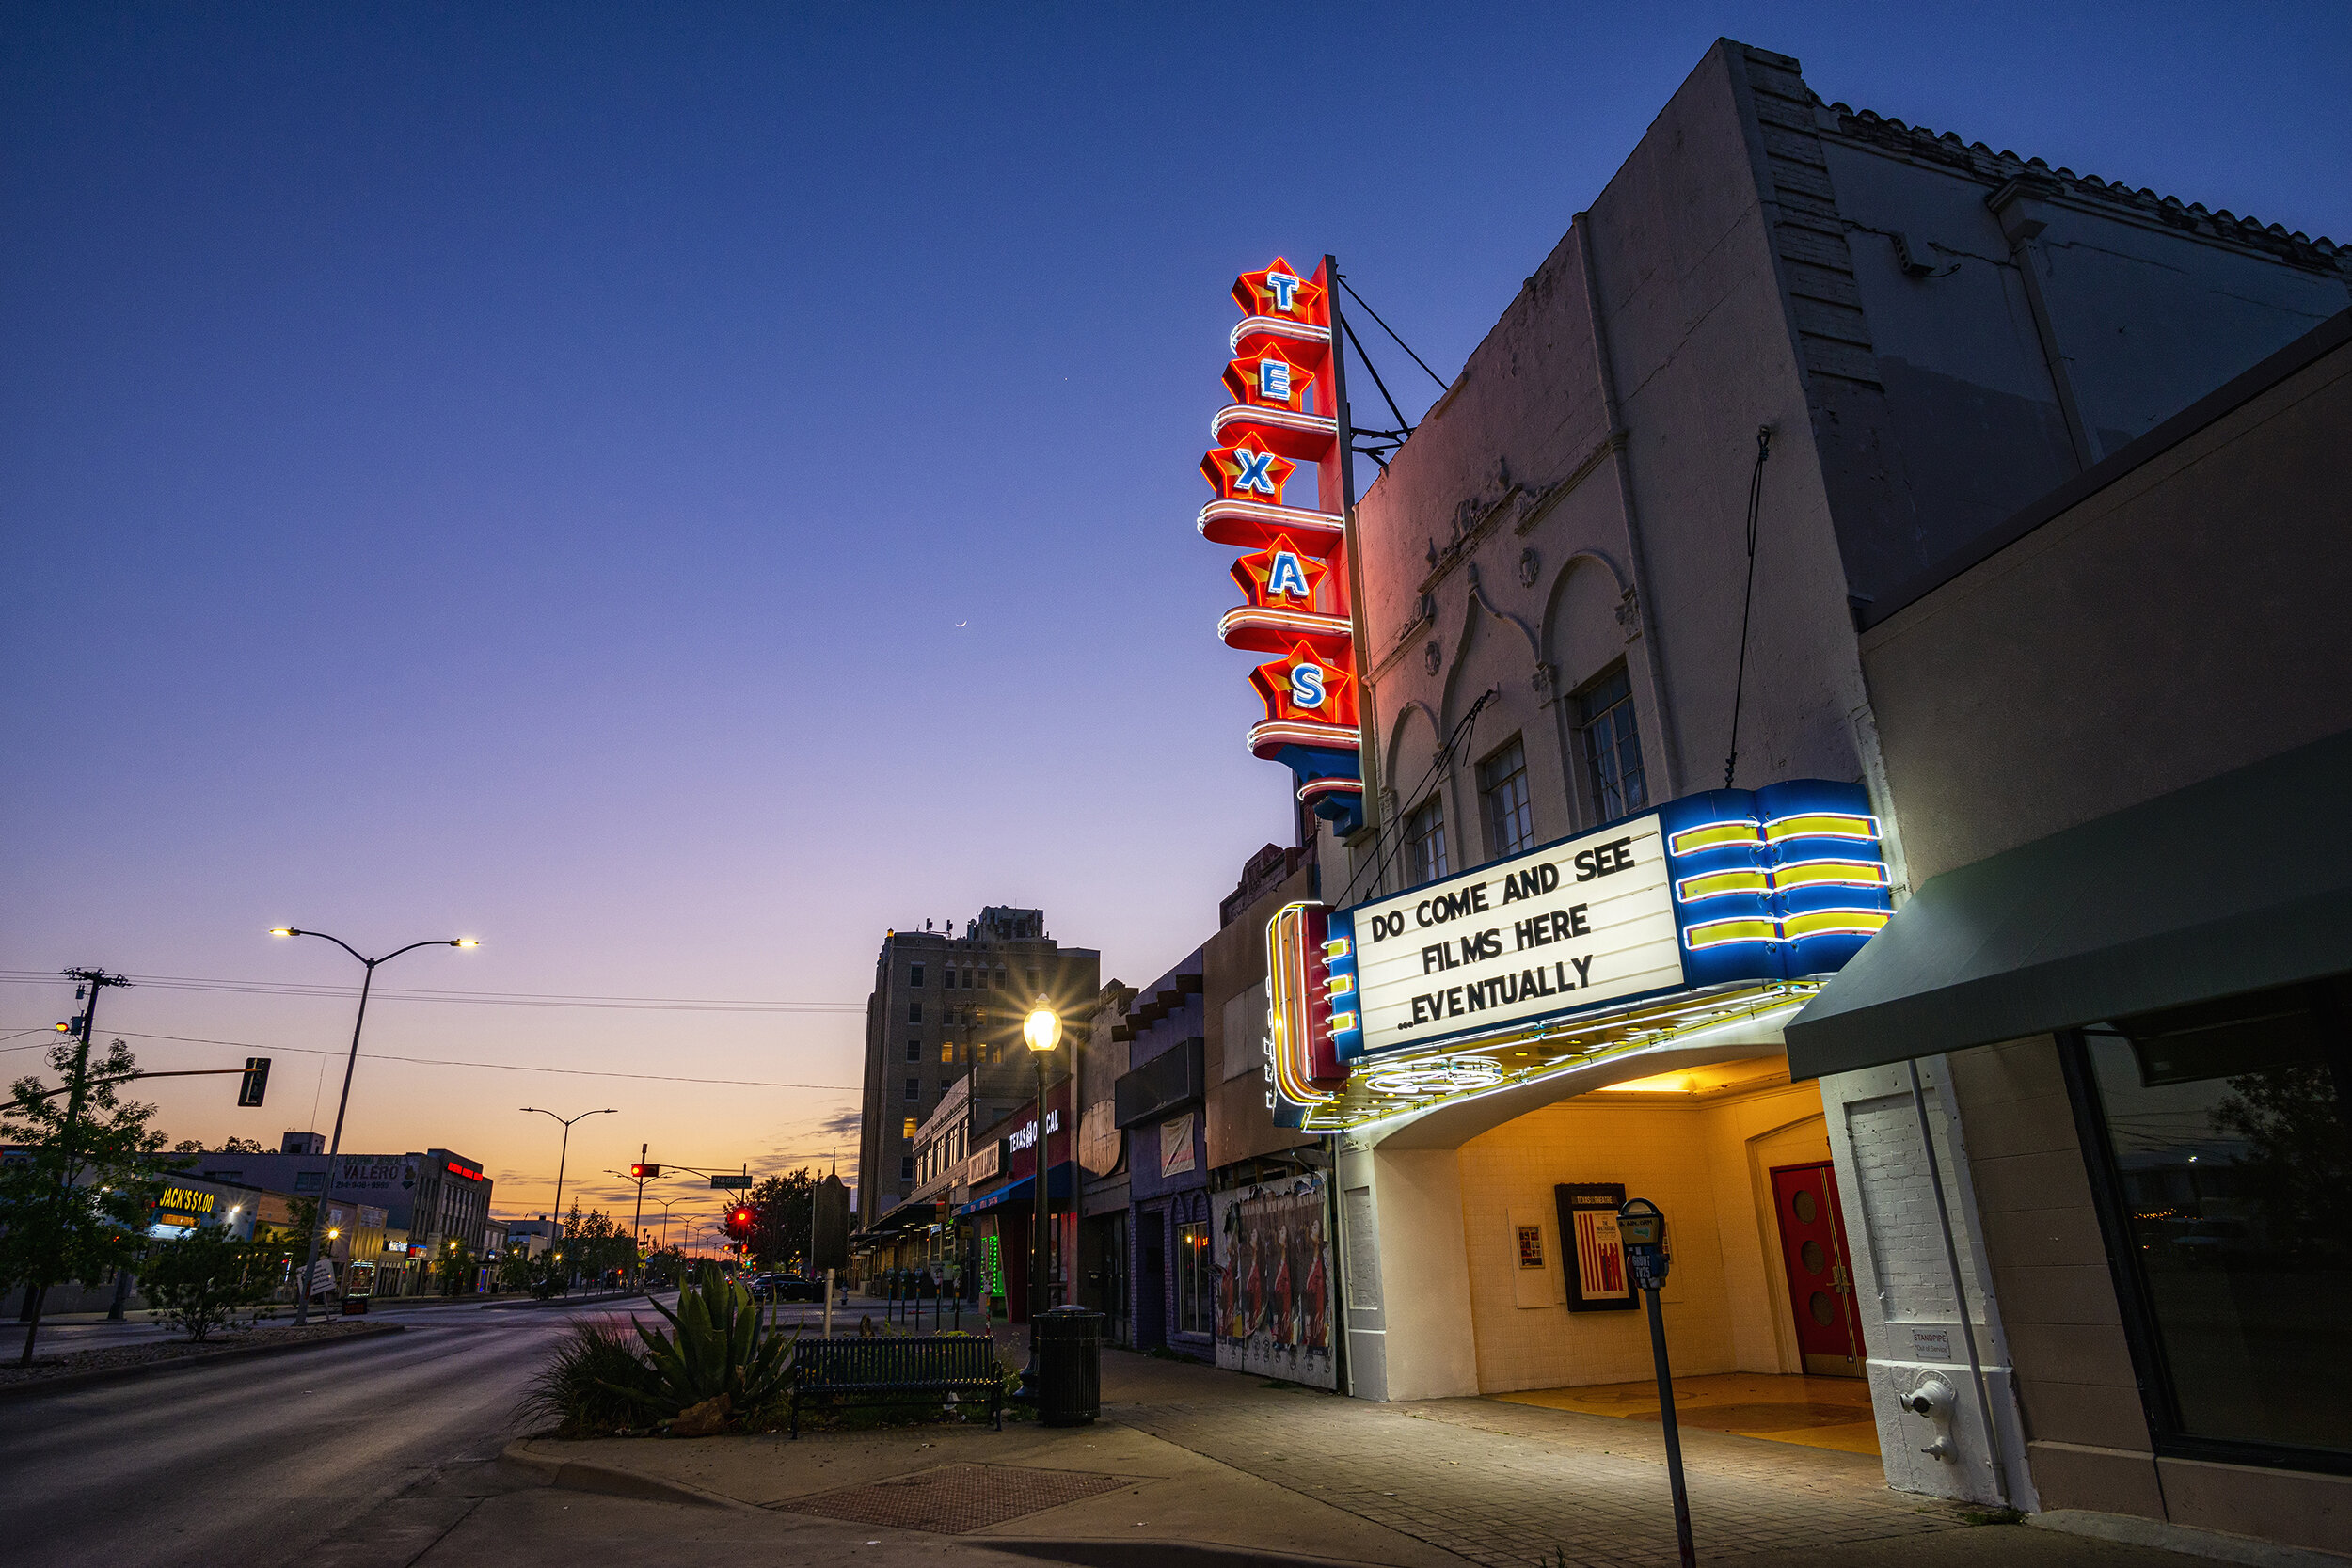  During the 2020 COVID-19 pandemic, Texas Theatre in Dallas, TX failed to host its typical din of bar patrons and moviegoers.  In May 2020, Dallas was locked down to stop the coronavirus’ spread, which failed.  The theater, opened in 1931 and once ow